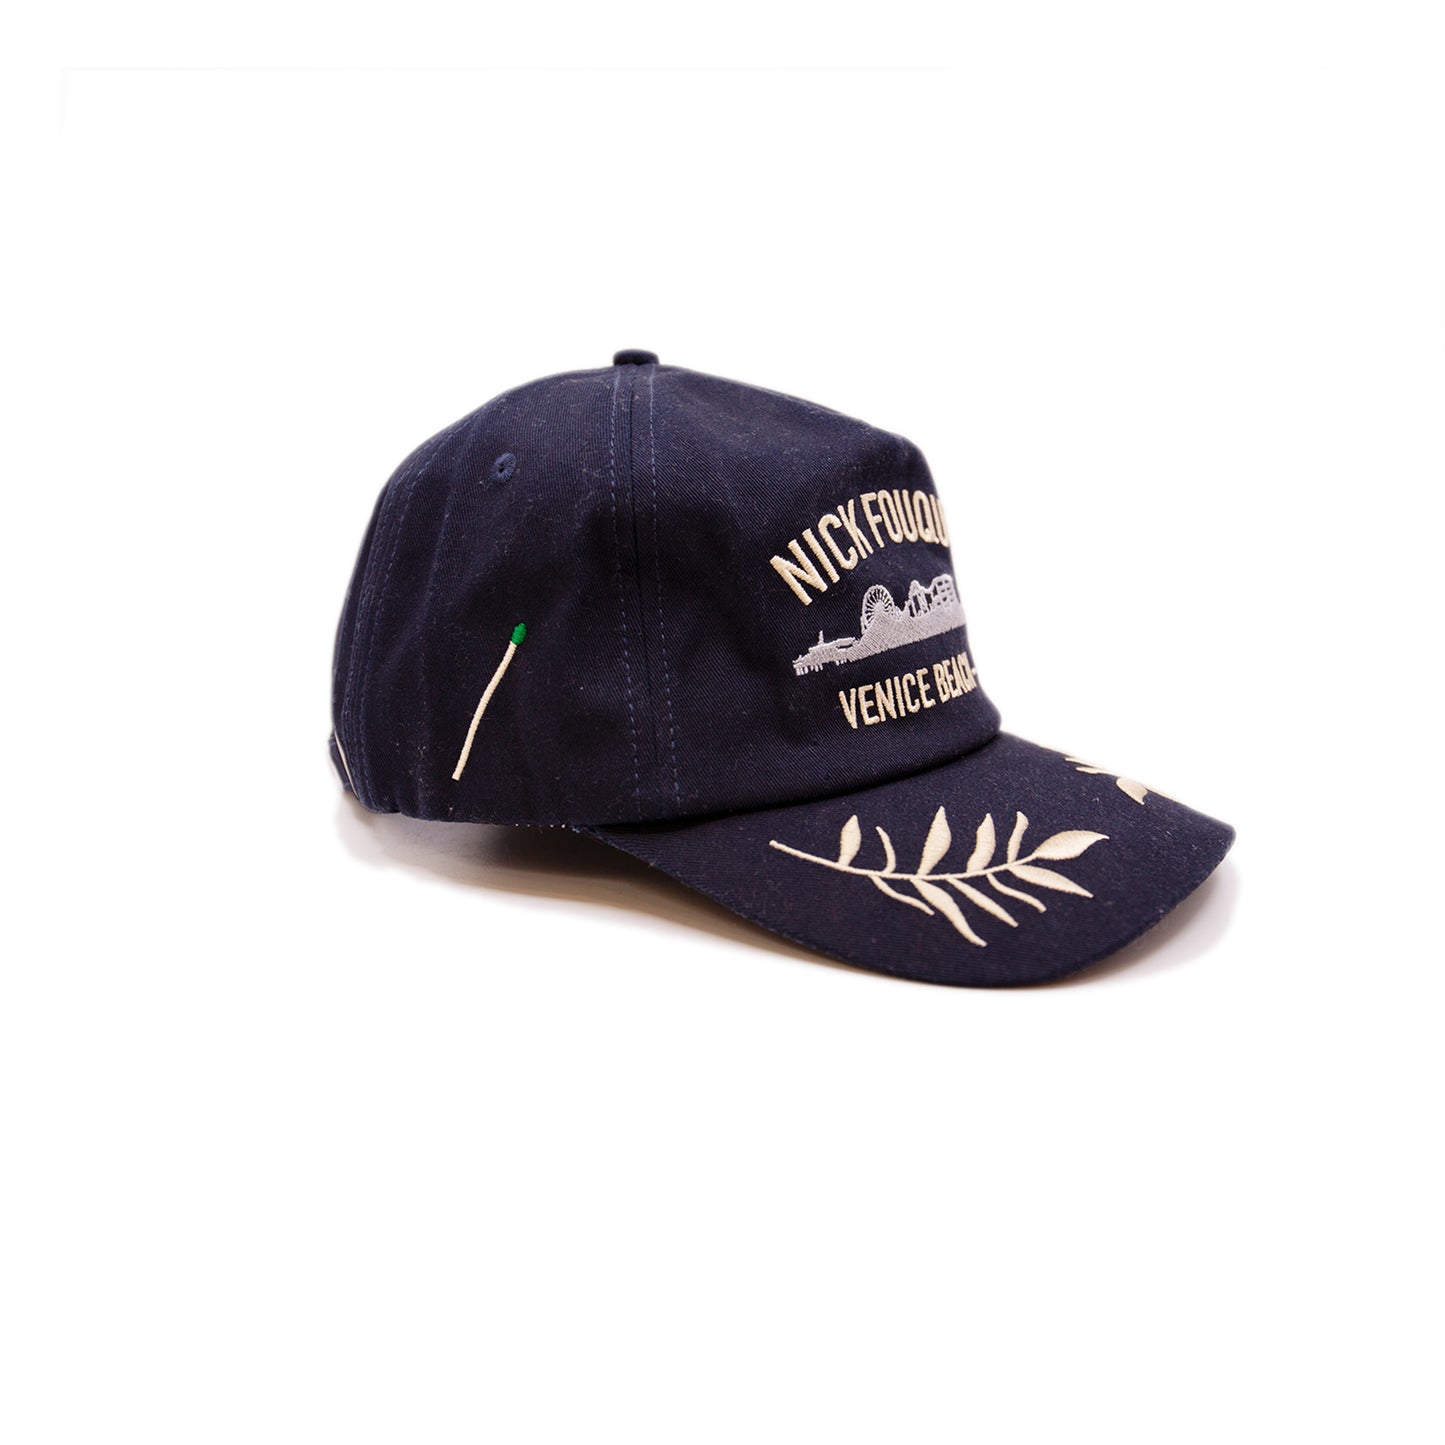 NF·US·V Hat  Cotton Baseball Cap in Navy Blue  Multicolor Embroidered Venice Skyline  Gold embroidered "Nick Fouquet Venice Beach - CA"   Embroidered matchstick on reverse side  One size fits all